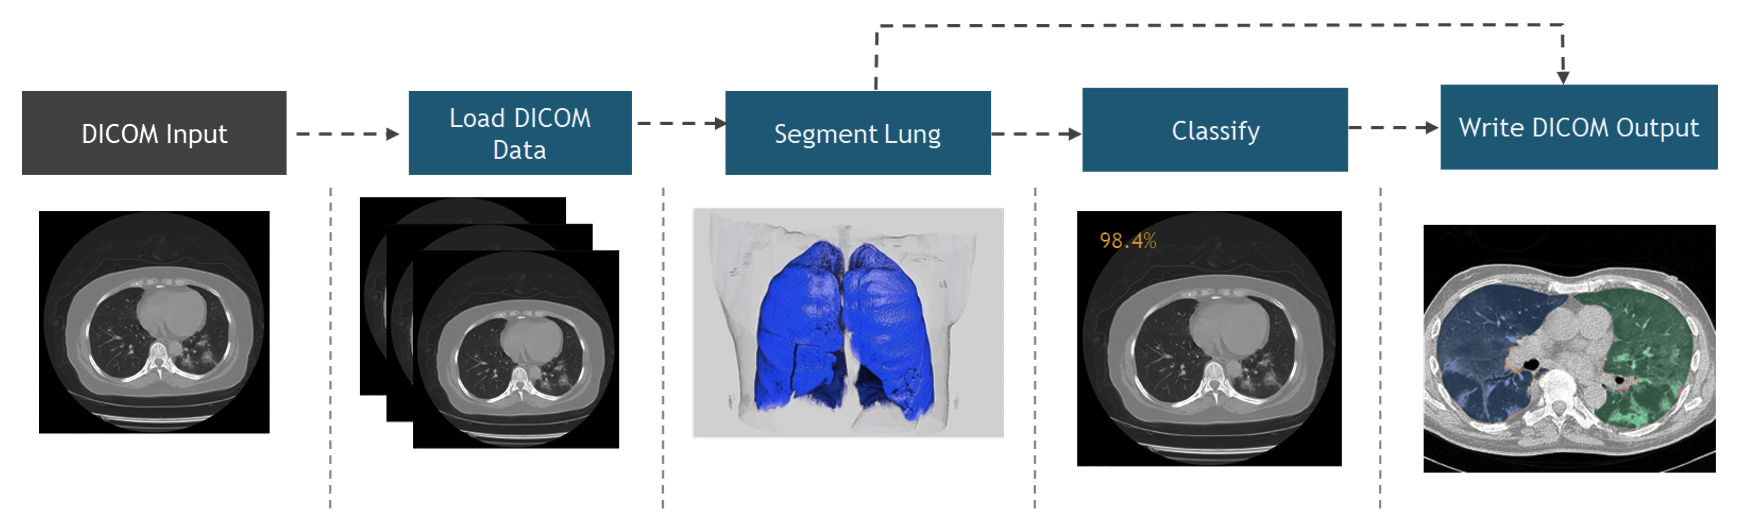 Diagram showing the medical imaging workflow starting with DICOM input and through the Load DICOM data, Segment lung, and Classify steps, and ending with Write DICOM output.
